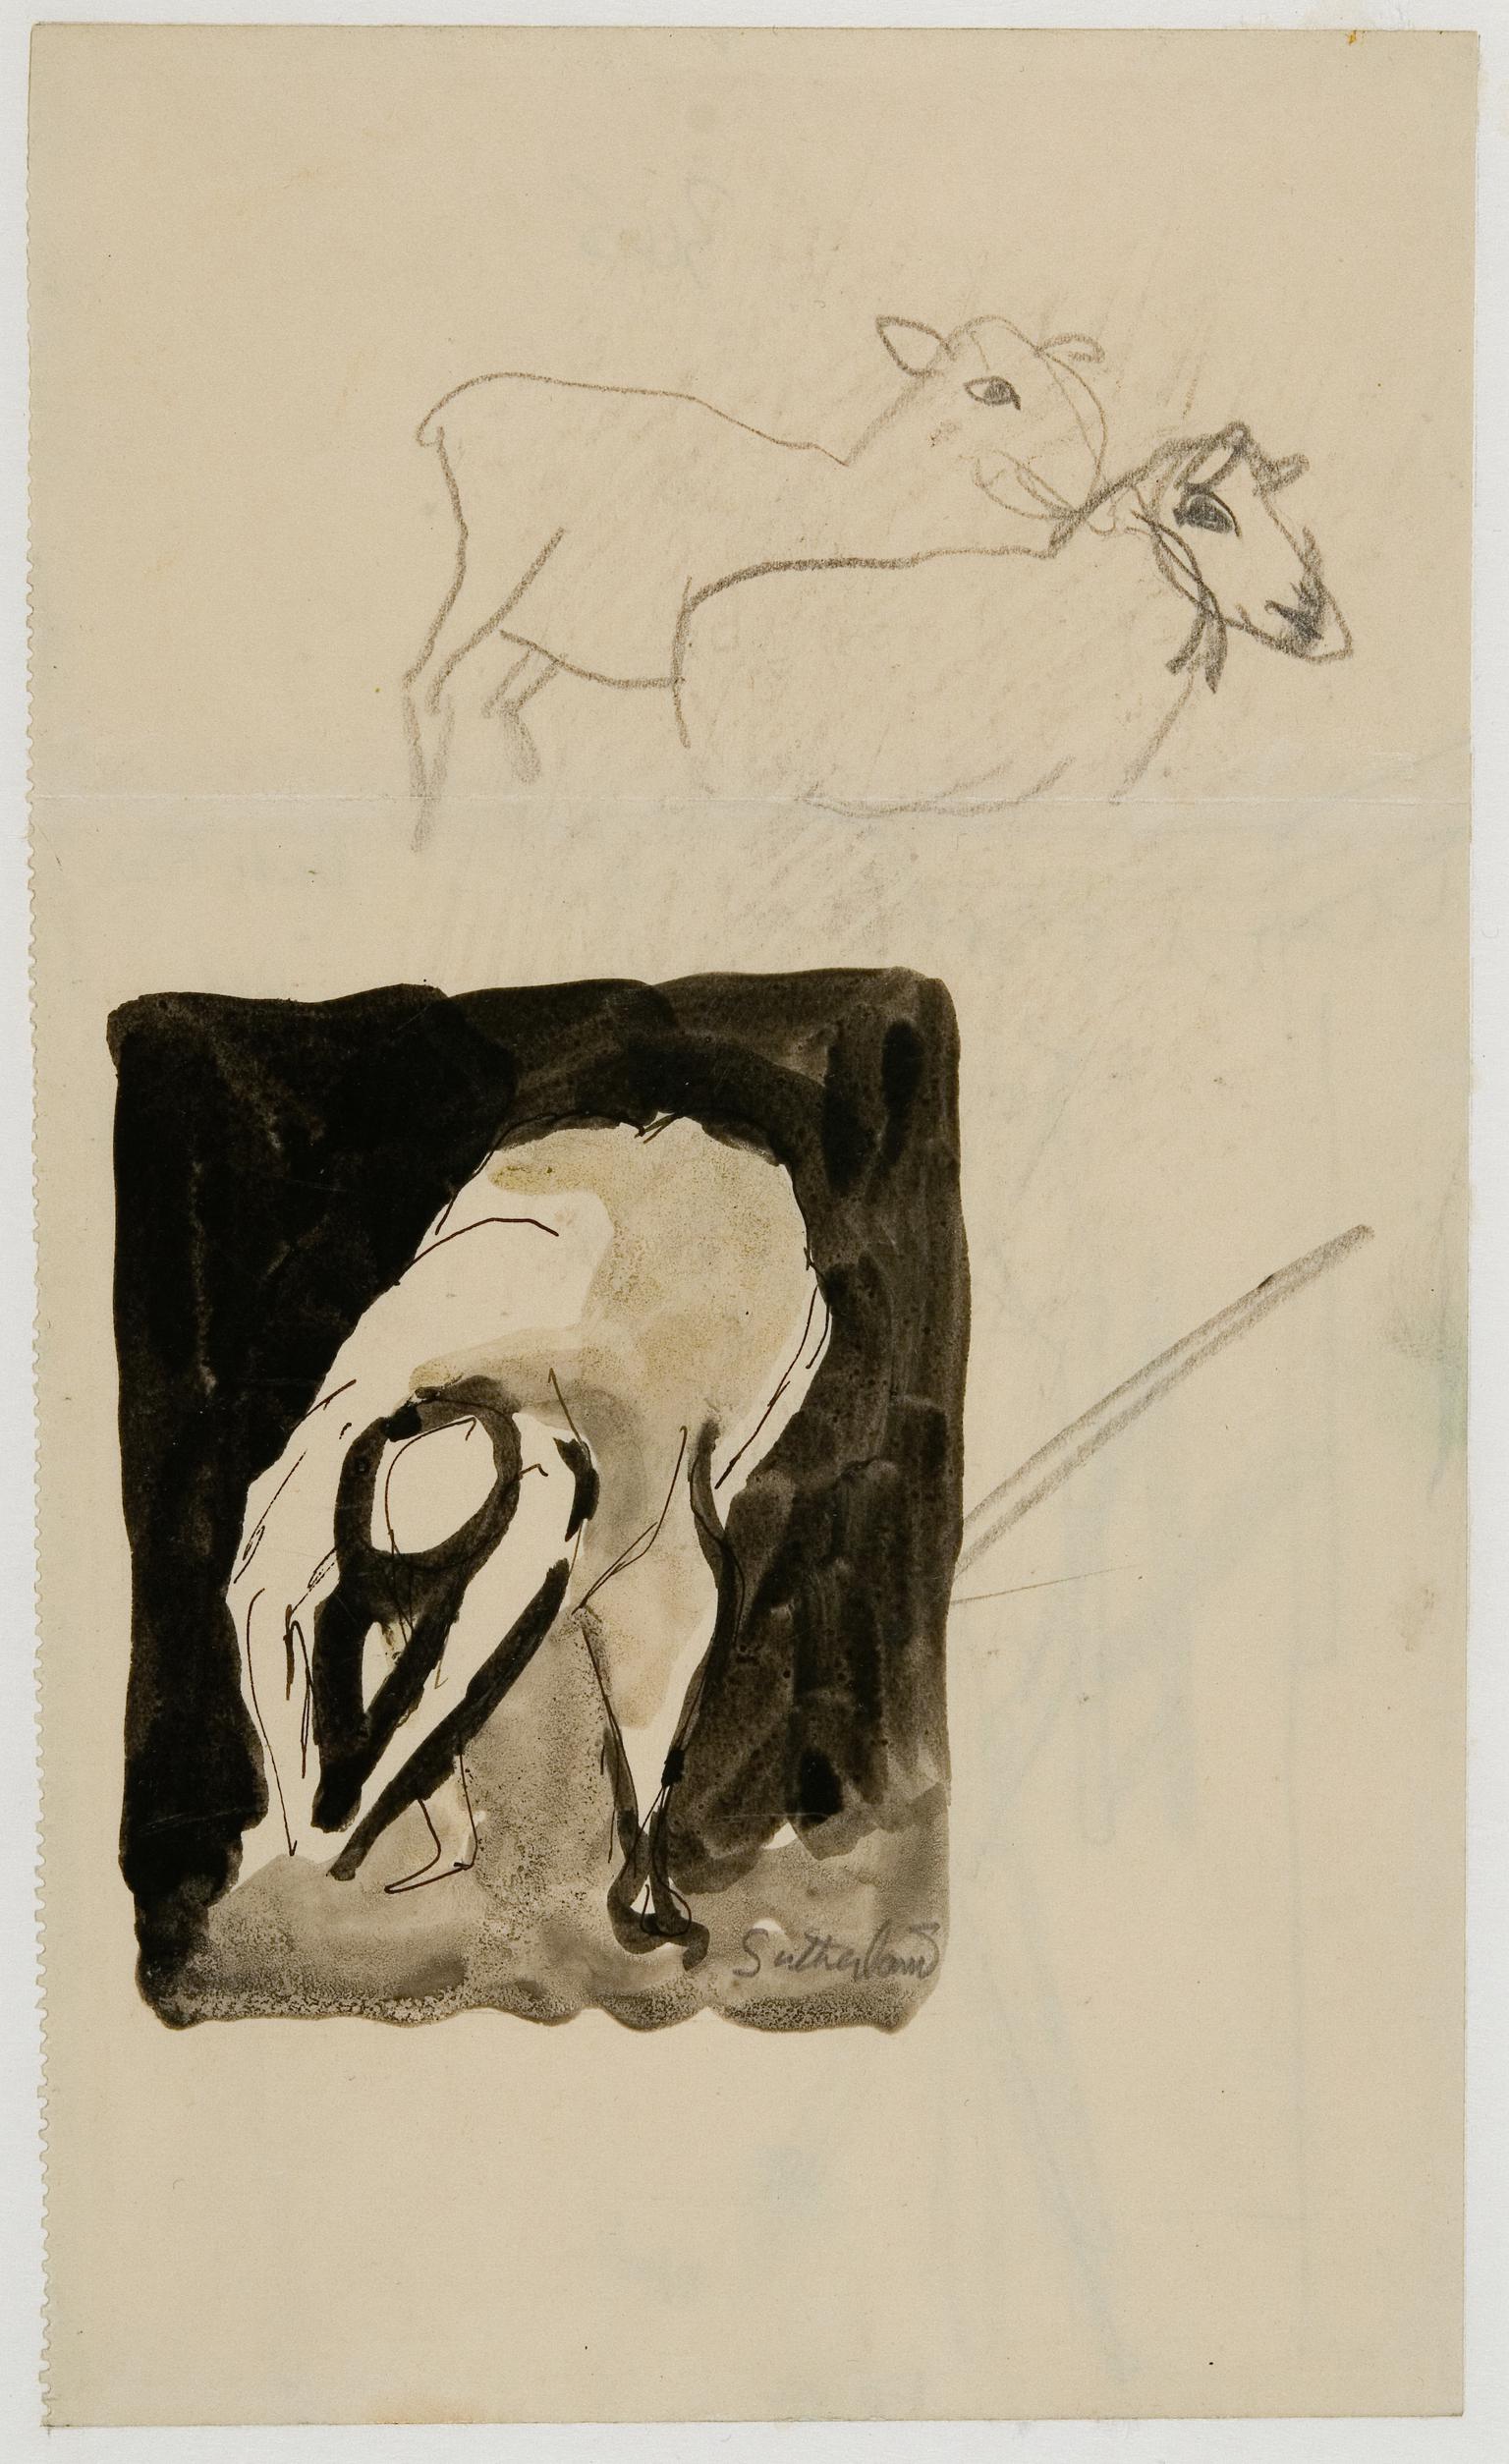 Drawing of sheep and figure